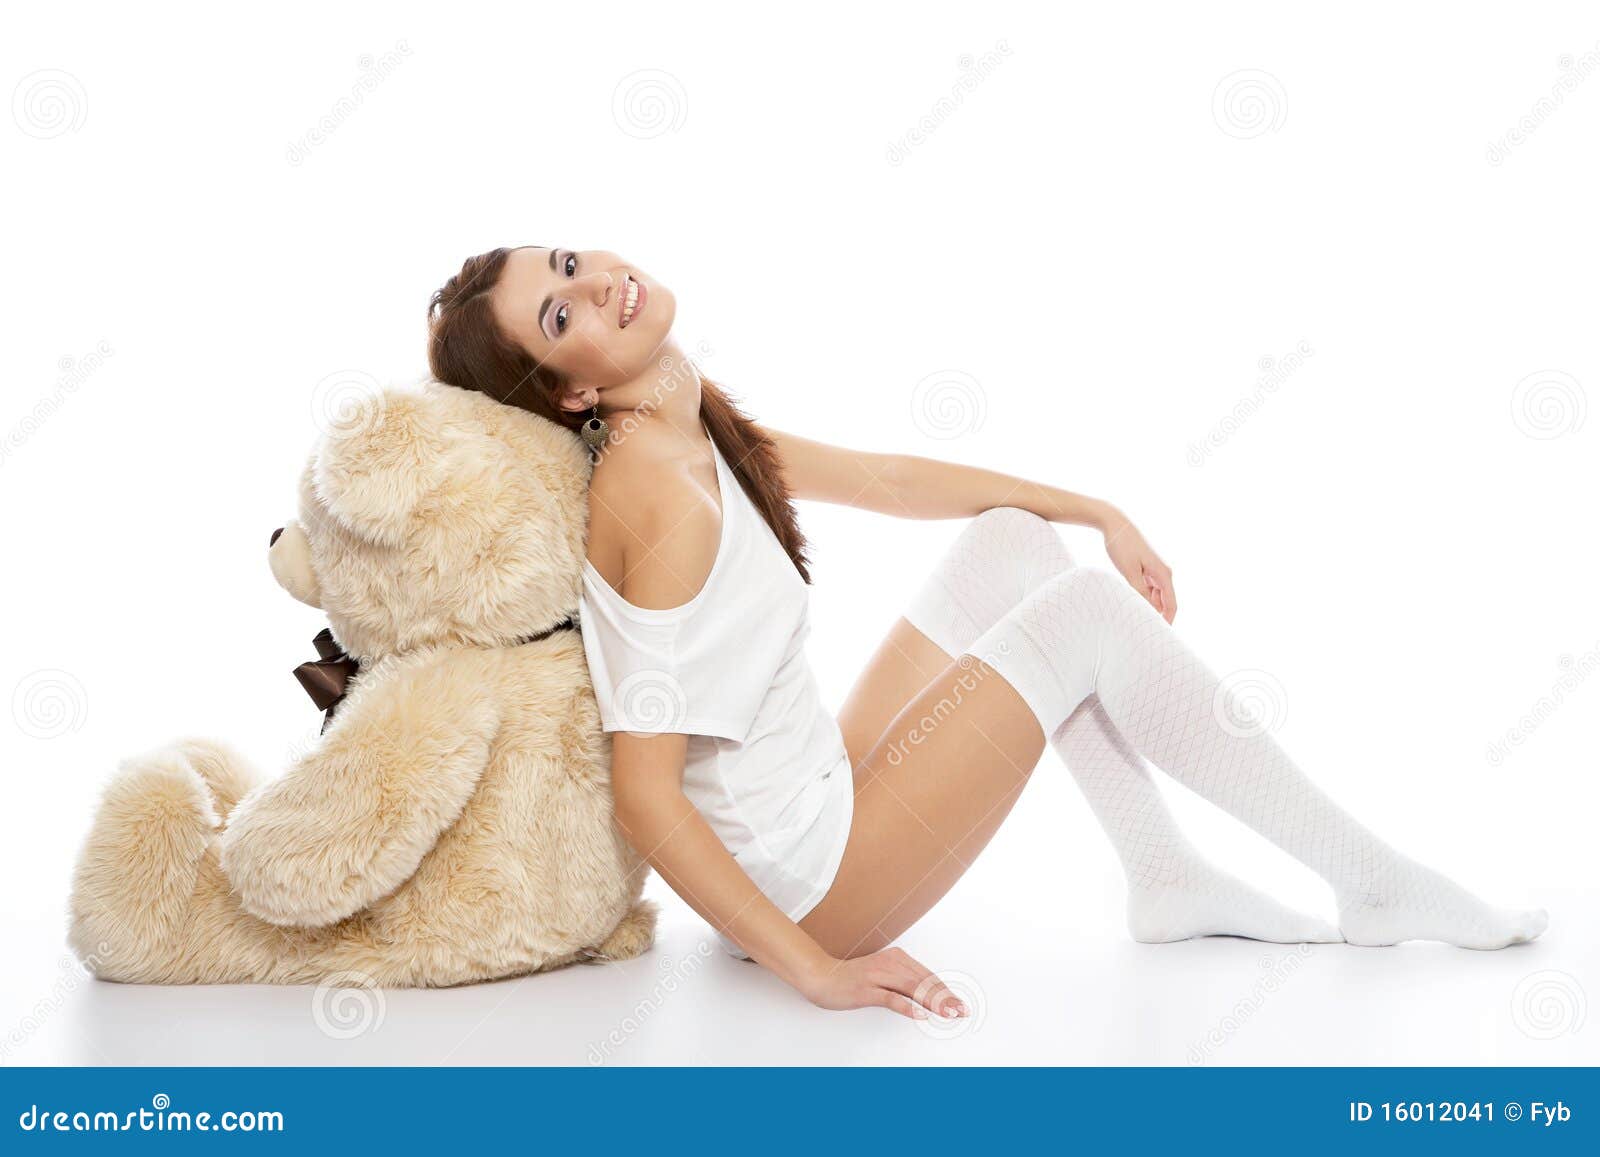 Bear pose Images - Search Images on Everypixel